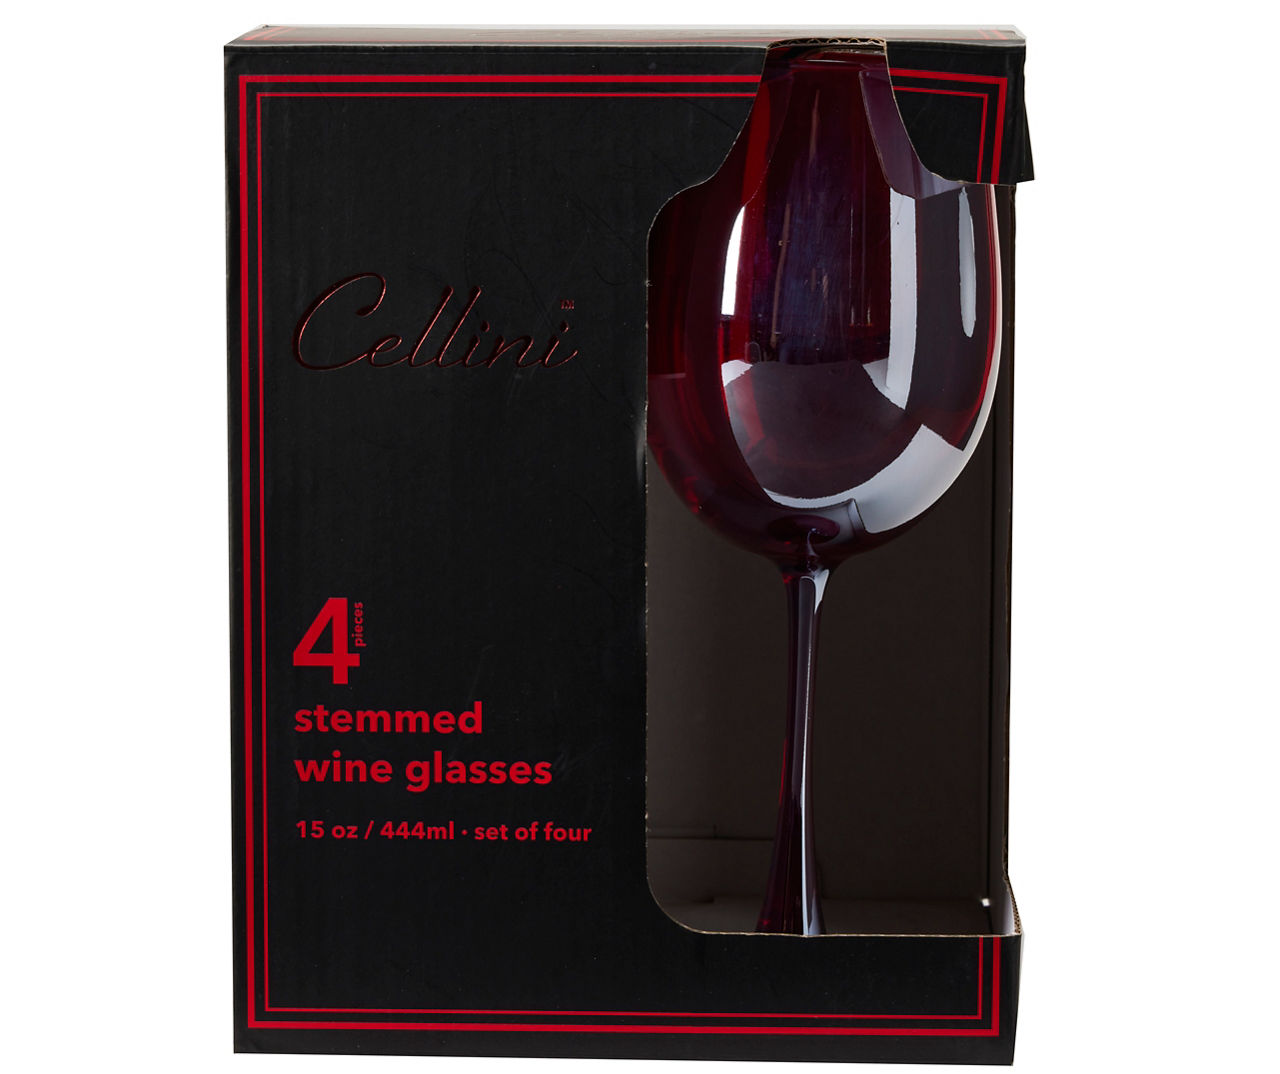 Home Essentials Cellini Red Luster Stemmed Wineglasses, 4-Pack